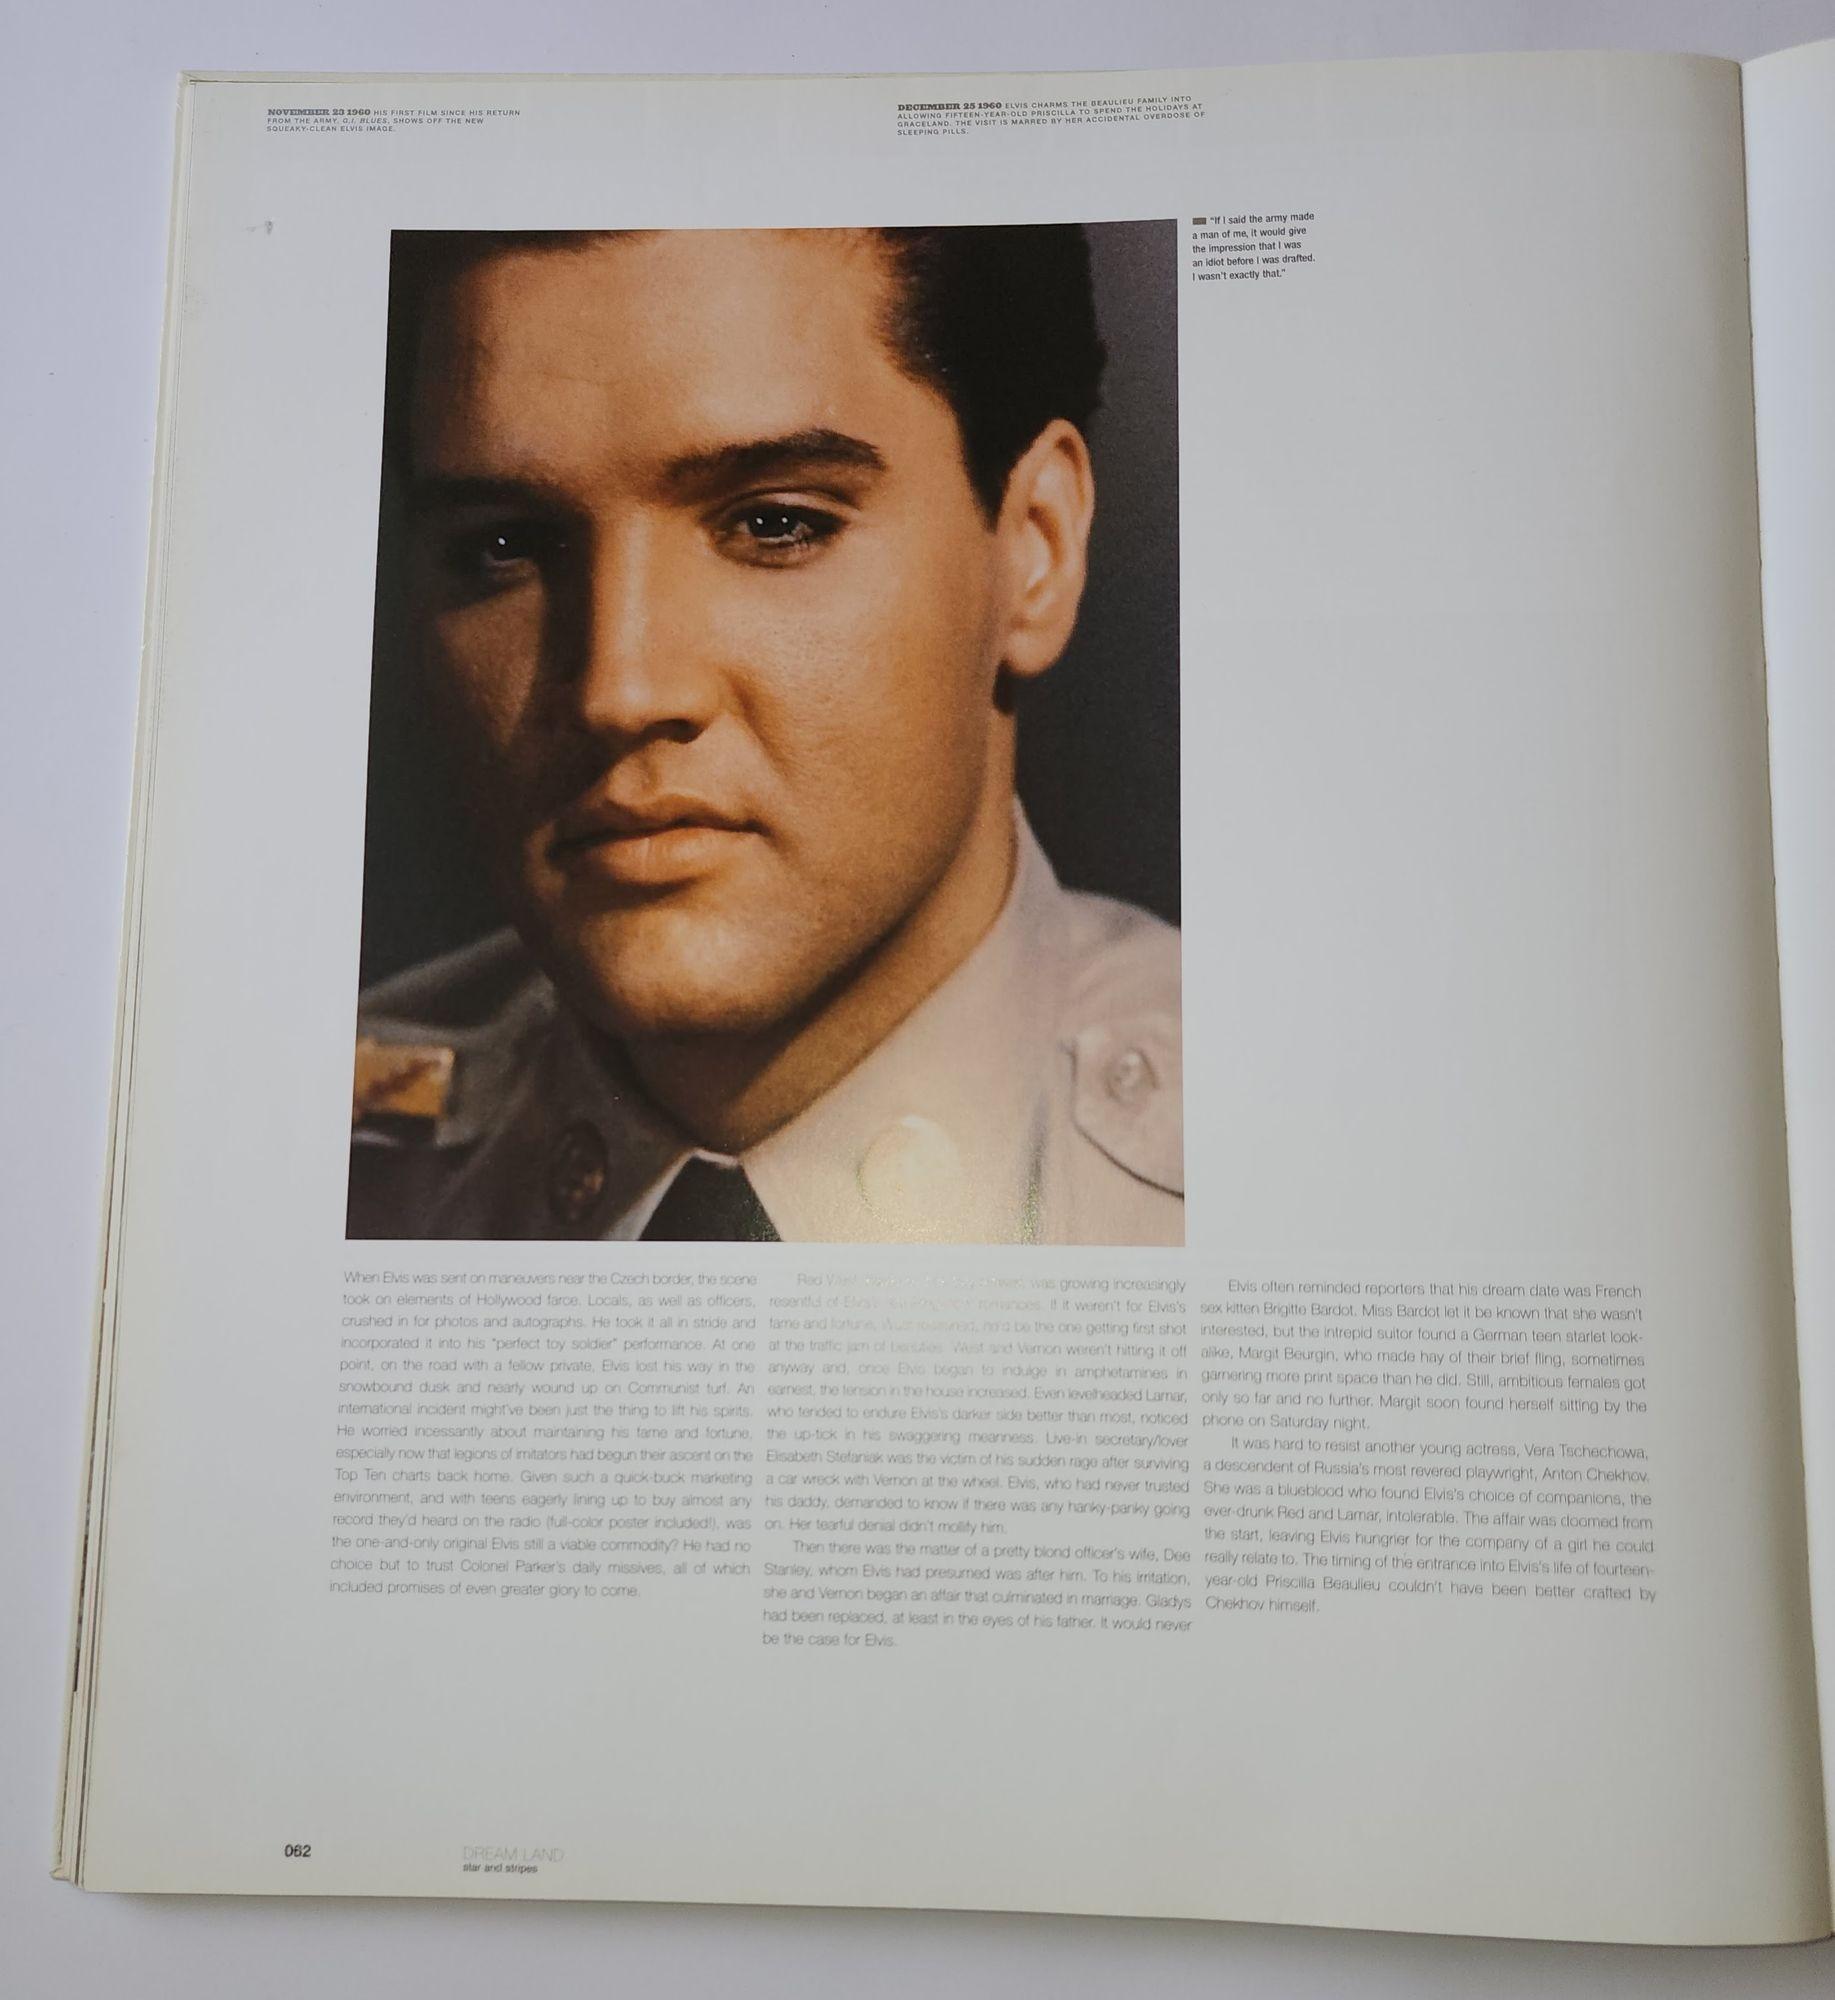 The King by Jim Piazza Elvis Presley - Large size coffee table book For Sale 3